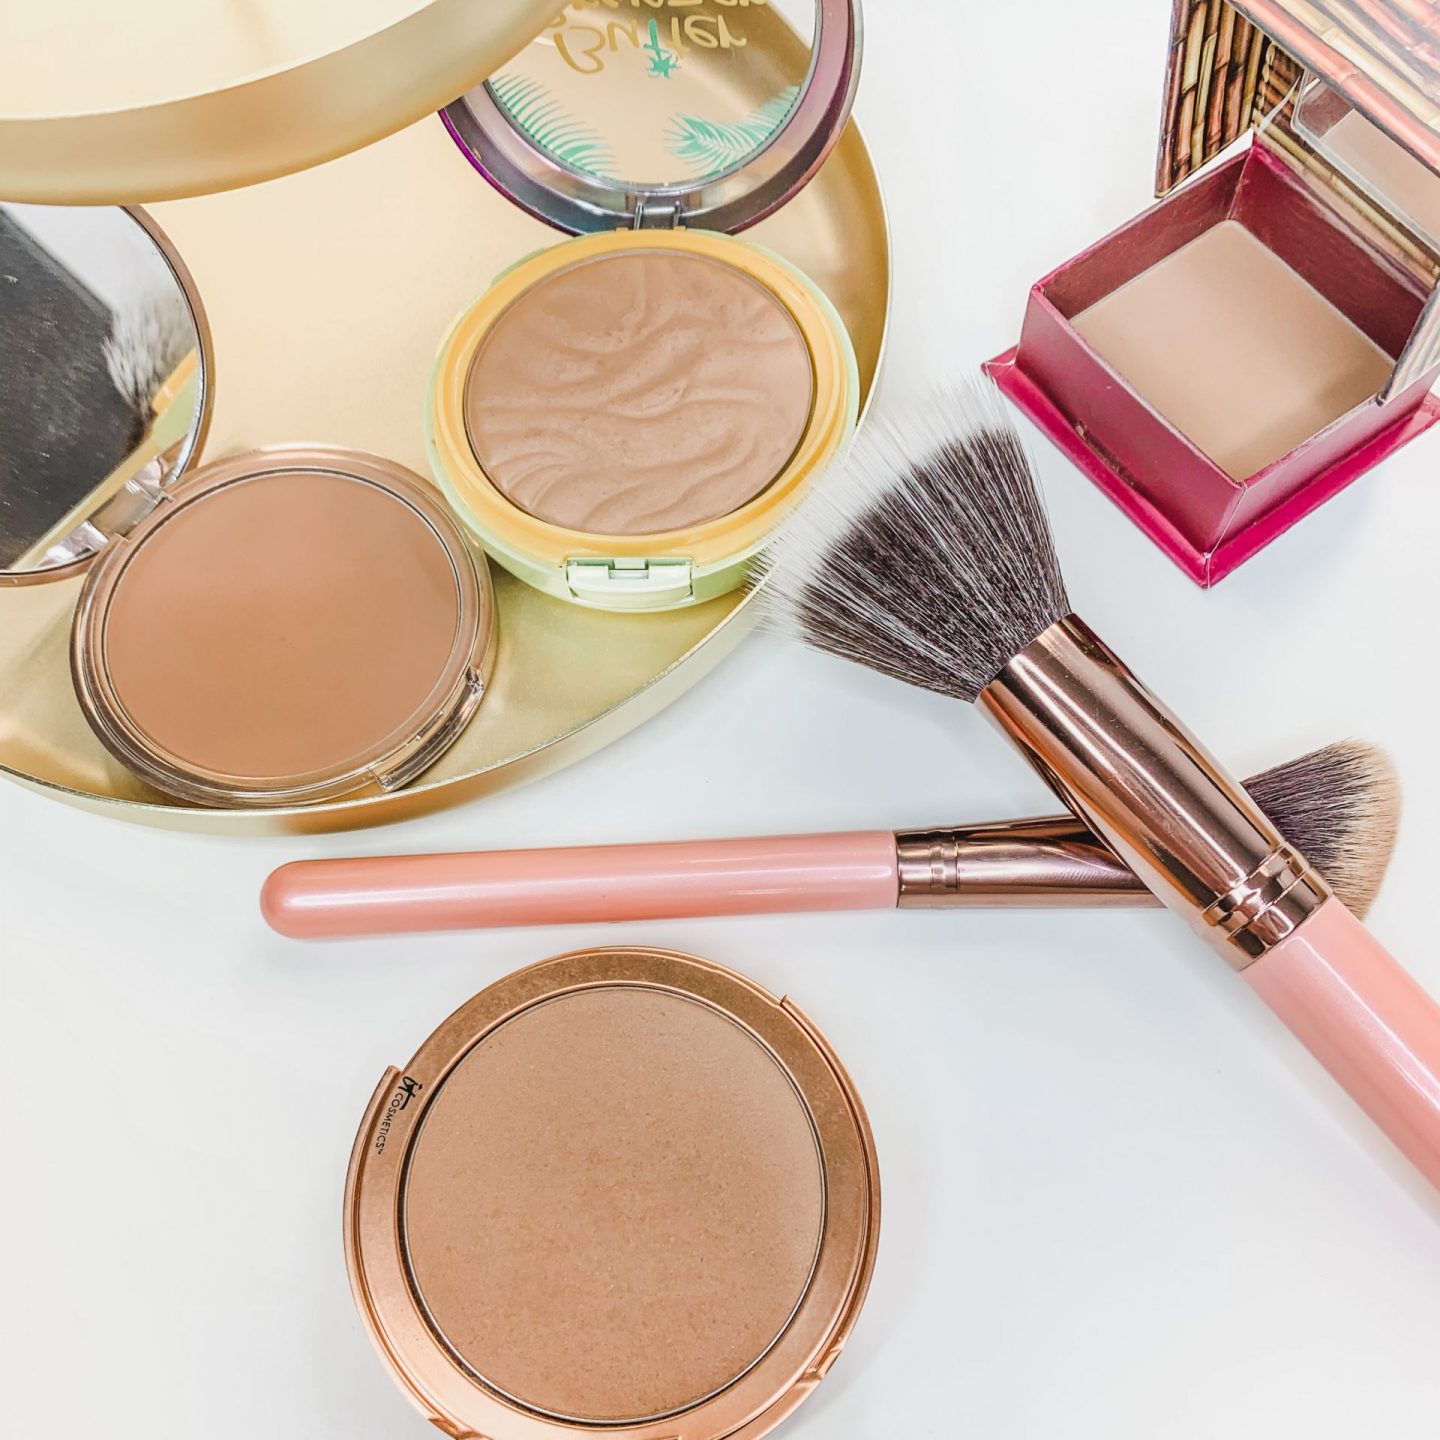 Ultimate Guide to Bronzer // How to Apply Bronzer // How to Contour // What is Bronzer? // Makeup 101 // Makeup Basics // Makeup for Beginners // How to Use Bronzing Powders // Best Bronzers | Beauty With Lily #makeup101 #makeupbasics 